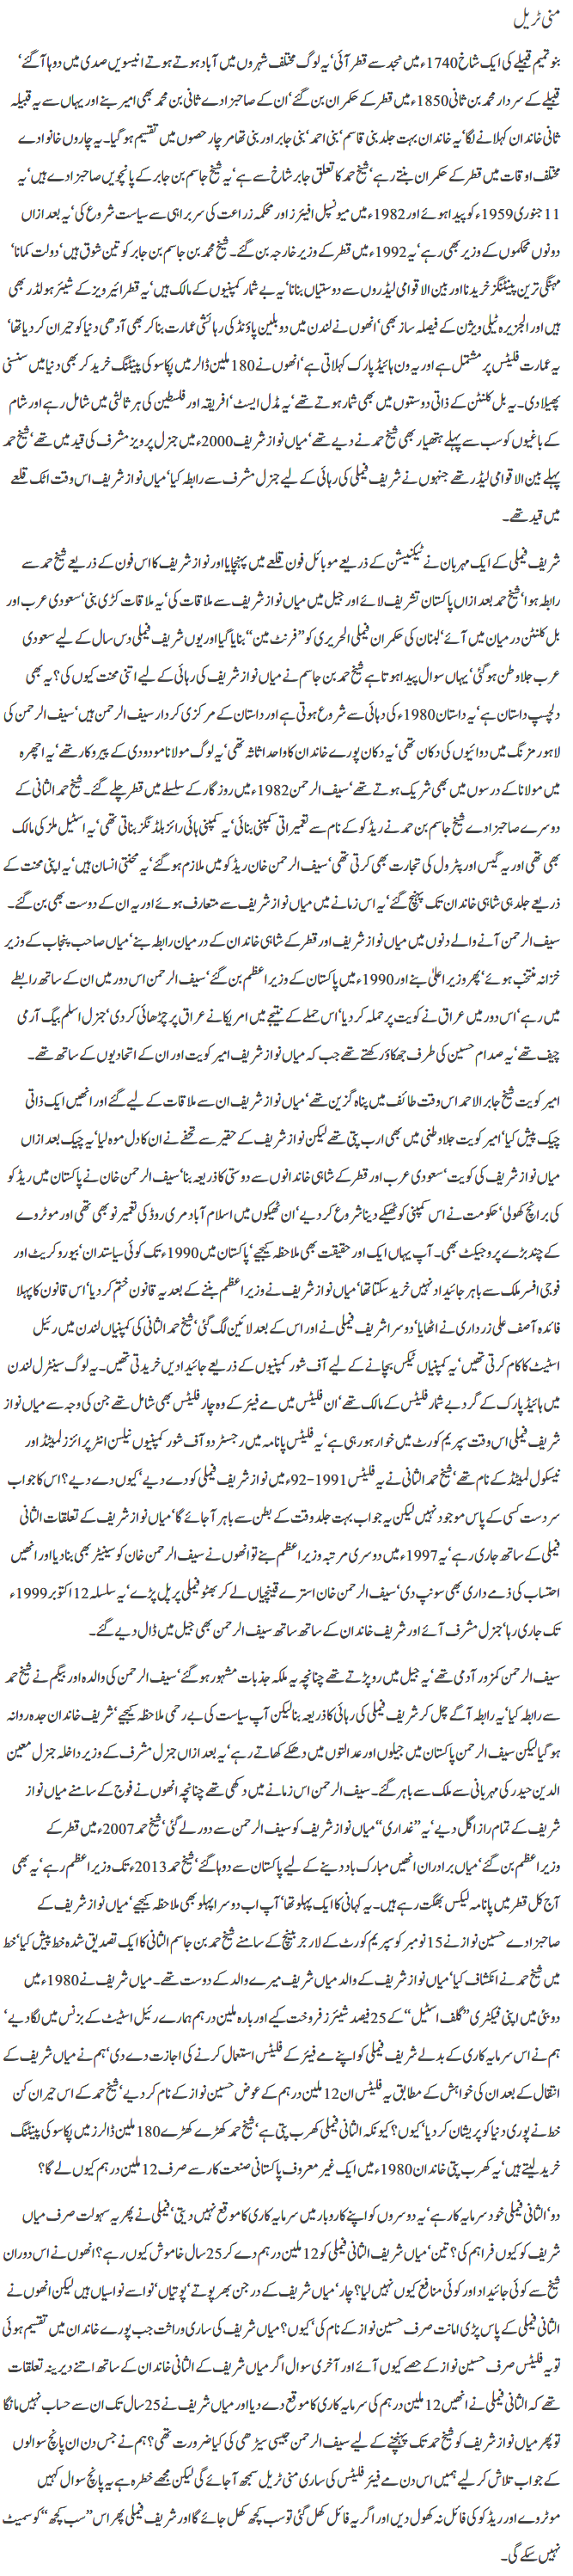 mini-trial-by-javed-chaudhry